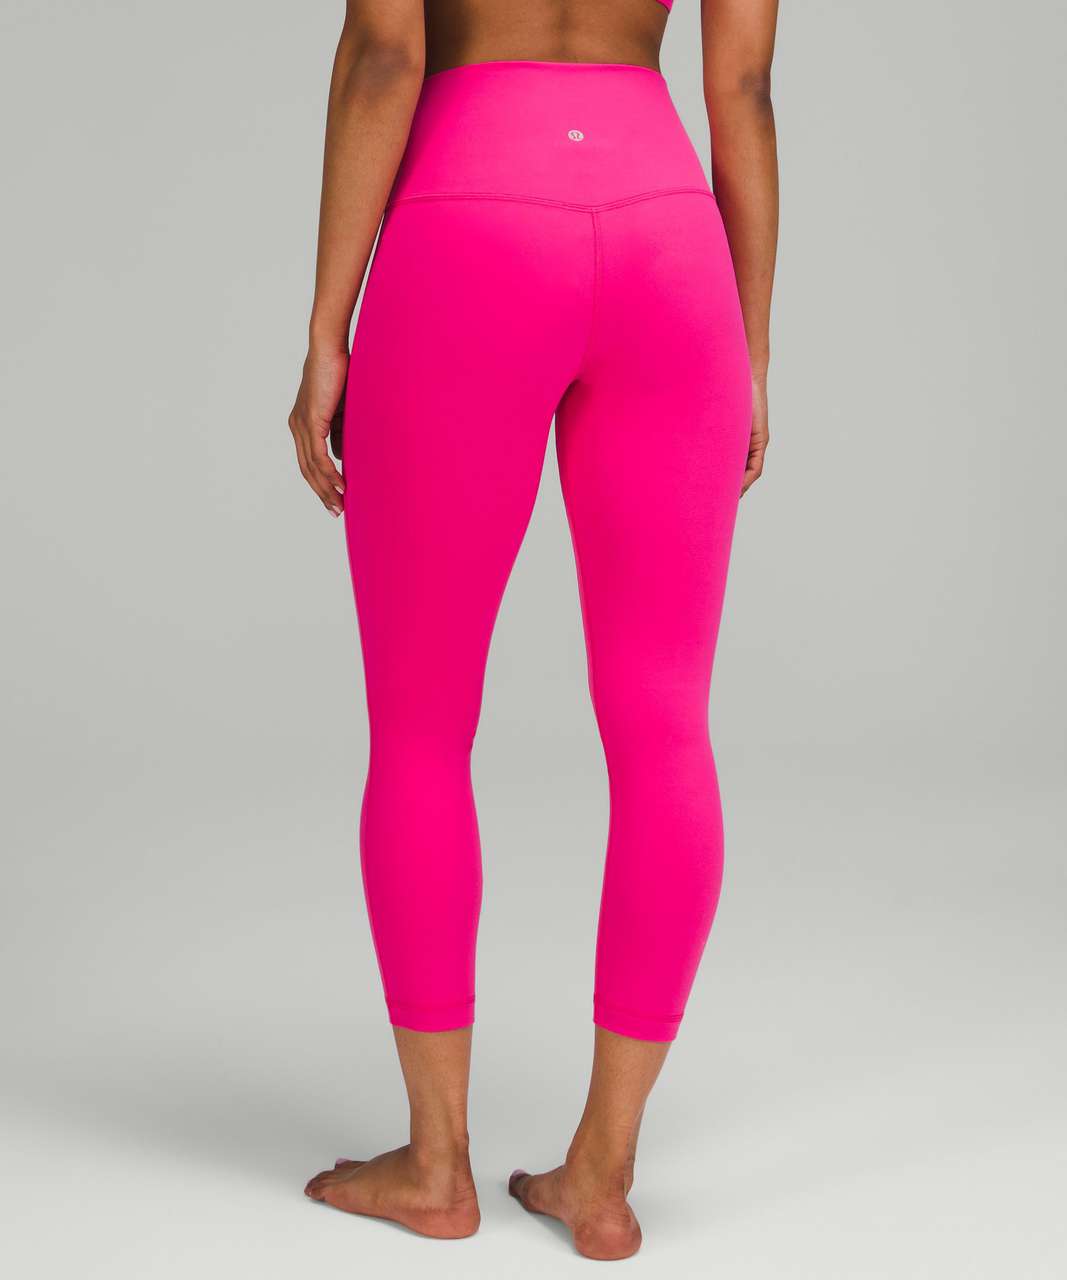 Sonic pink lululemon set! The most gorgeous color.